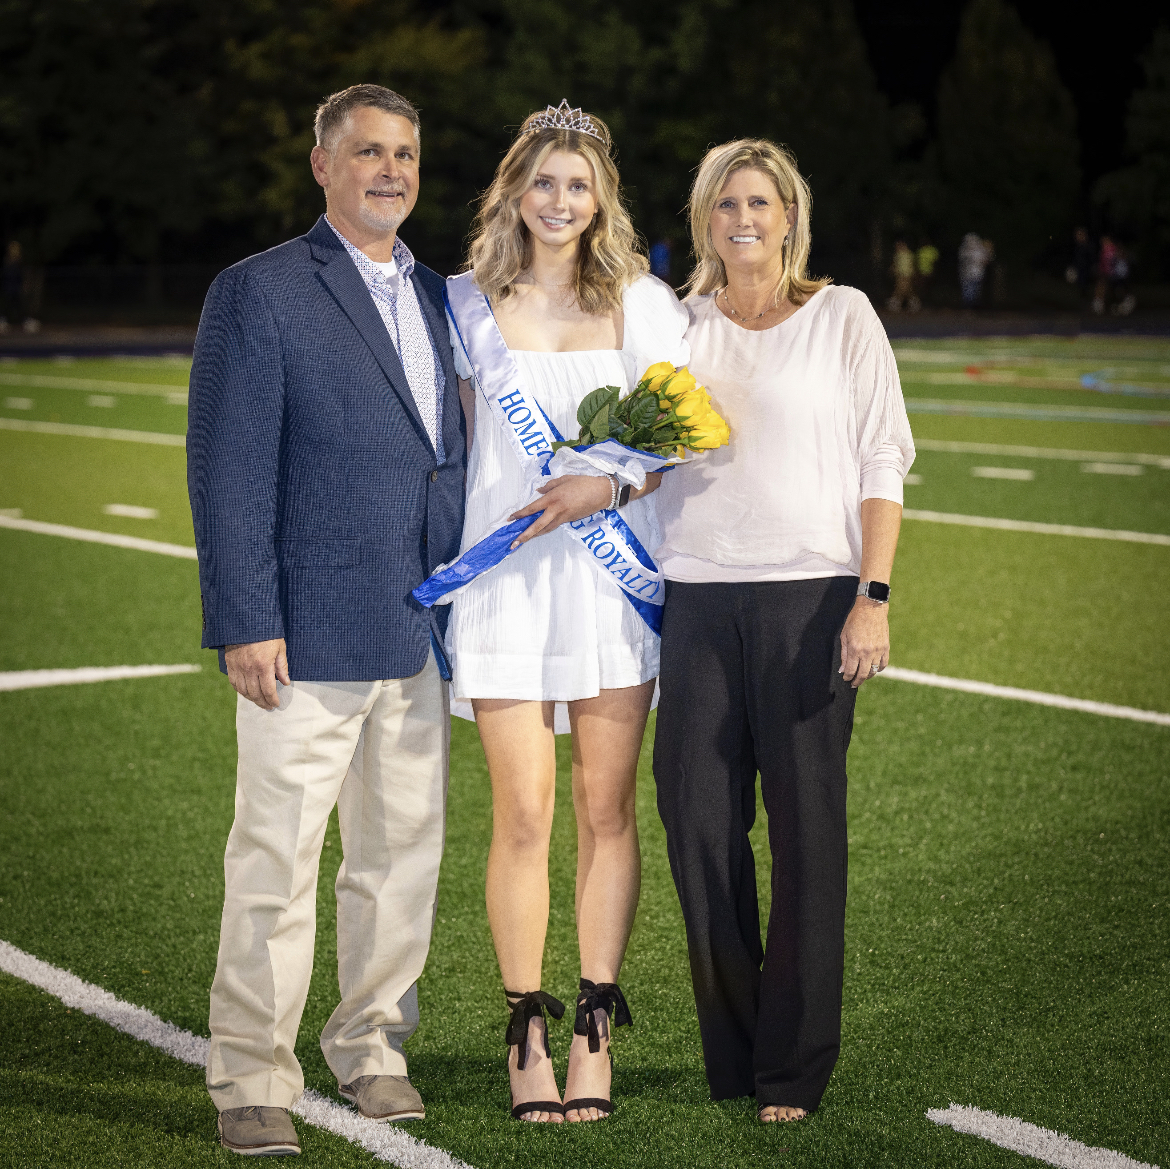 Sophia Casciano (middle) with her parents Lou Casciano and Amy
Casicano moments after she was crowned 2023 homecoming royalty. 